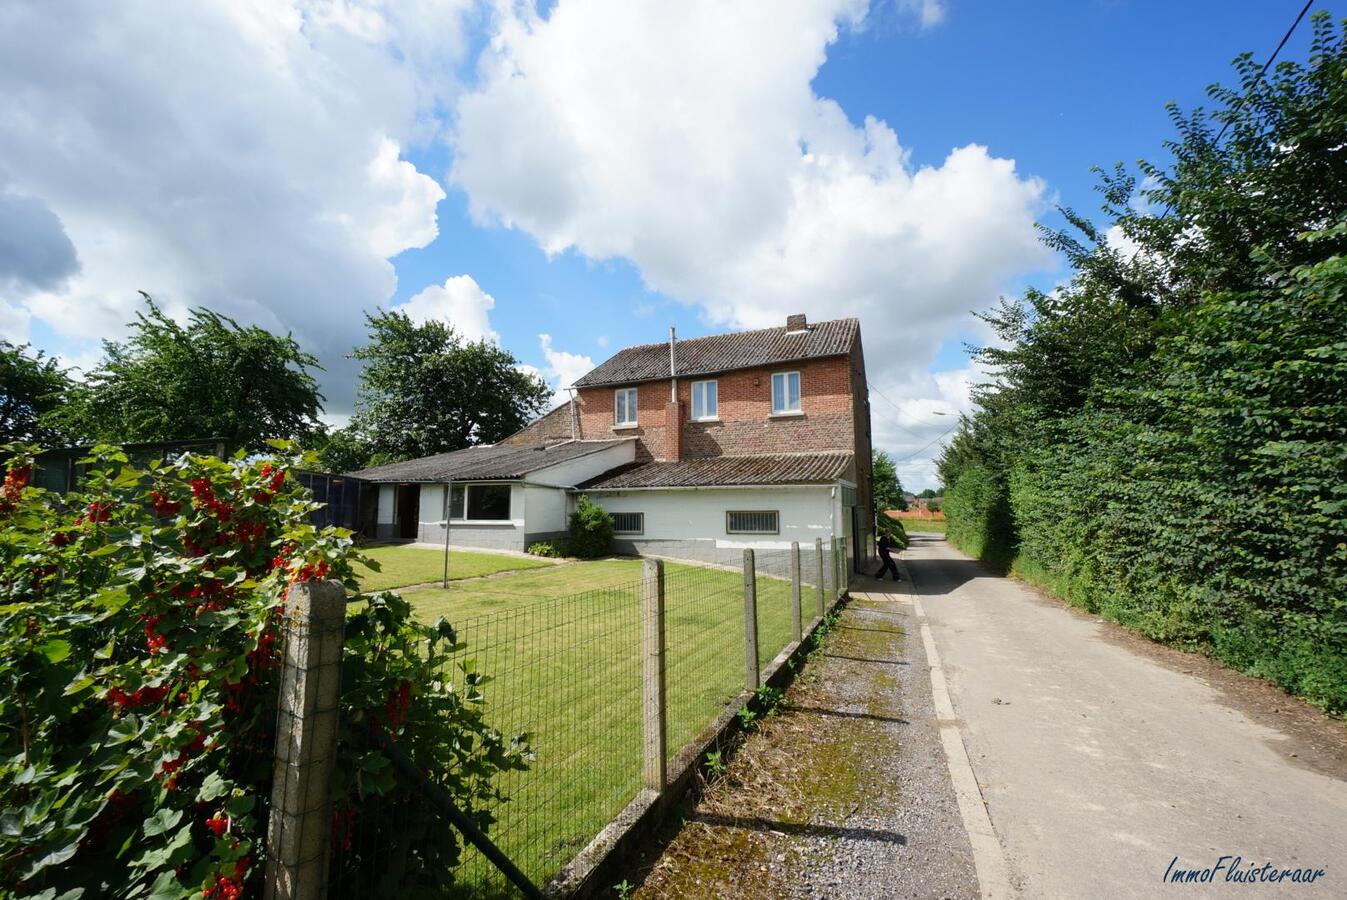 Property sold in Horpmaal